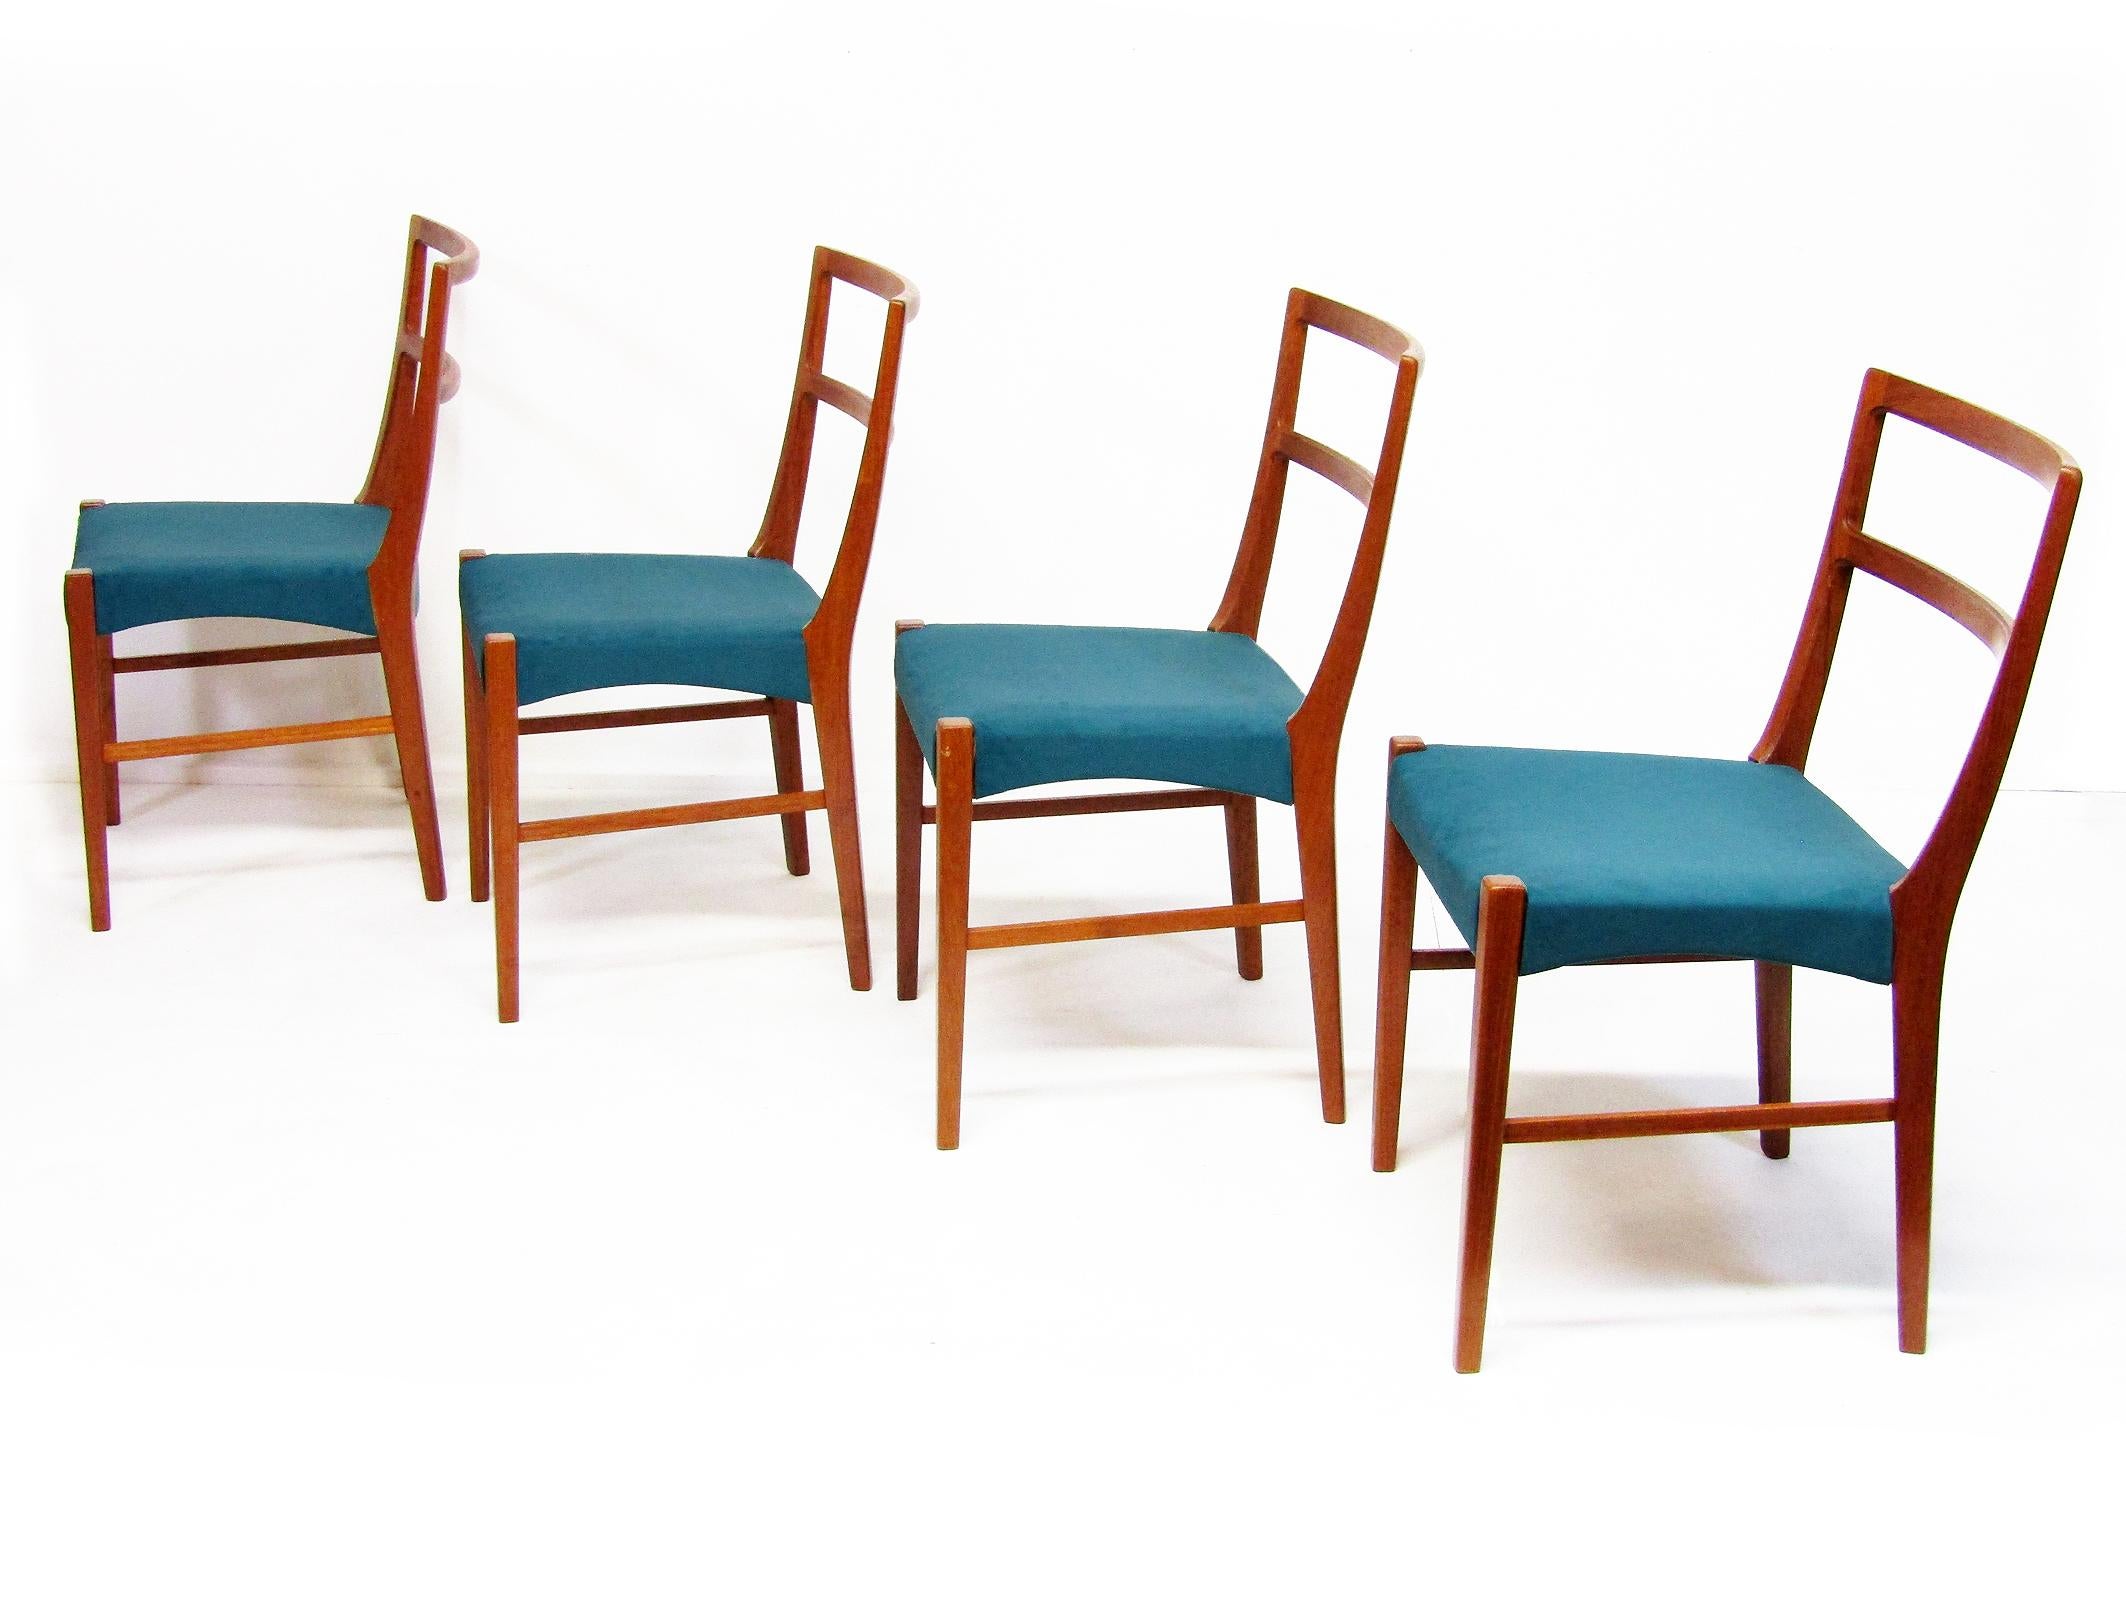 Four 1960s Danish Dining Chairs by Johannes Andersen for Bernhard Pedersen In Good Condition For Sale In Shepperton, Surrey